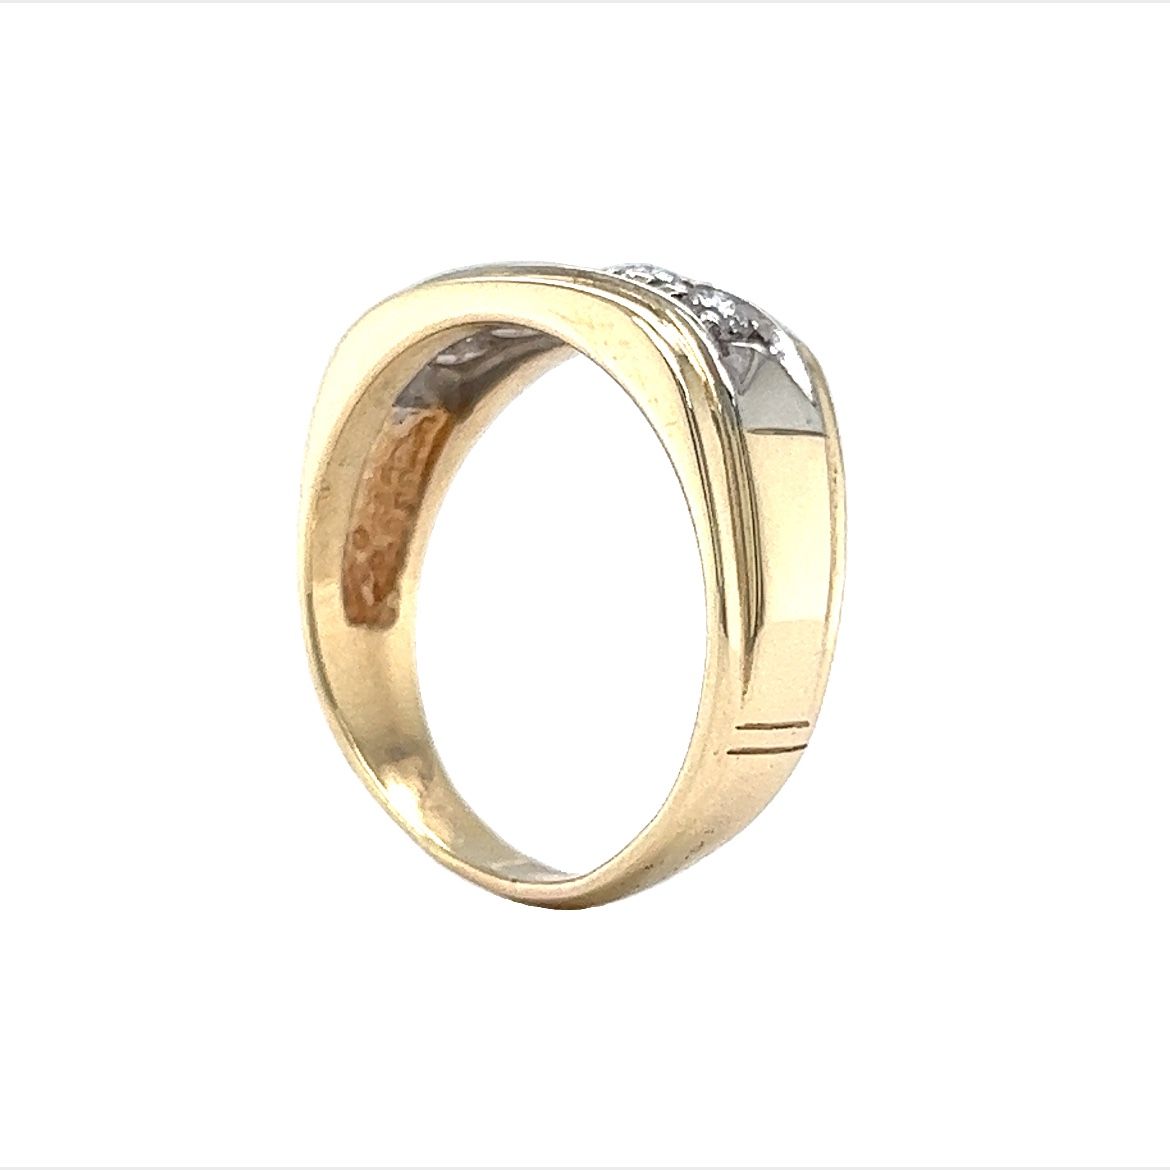 Buy BEEZAL 14KT Real Gold Jewellery Ring Designed (Weight: More than  1.20gms) with Cubic Zironica Diamond | The Adjustable Piece can fit any  Size Finger | BIS Hallmarked Jewellery at Amazon.in